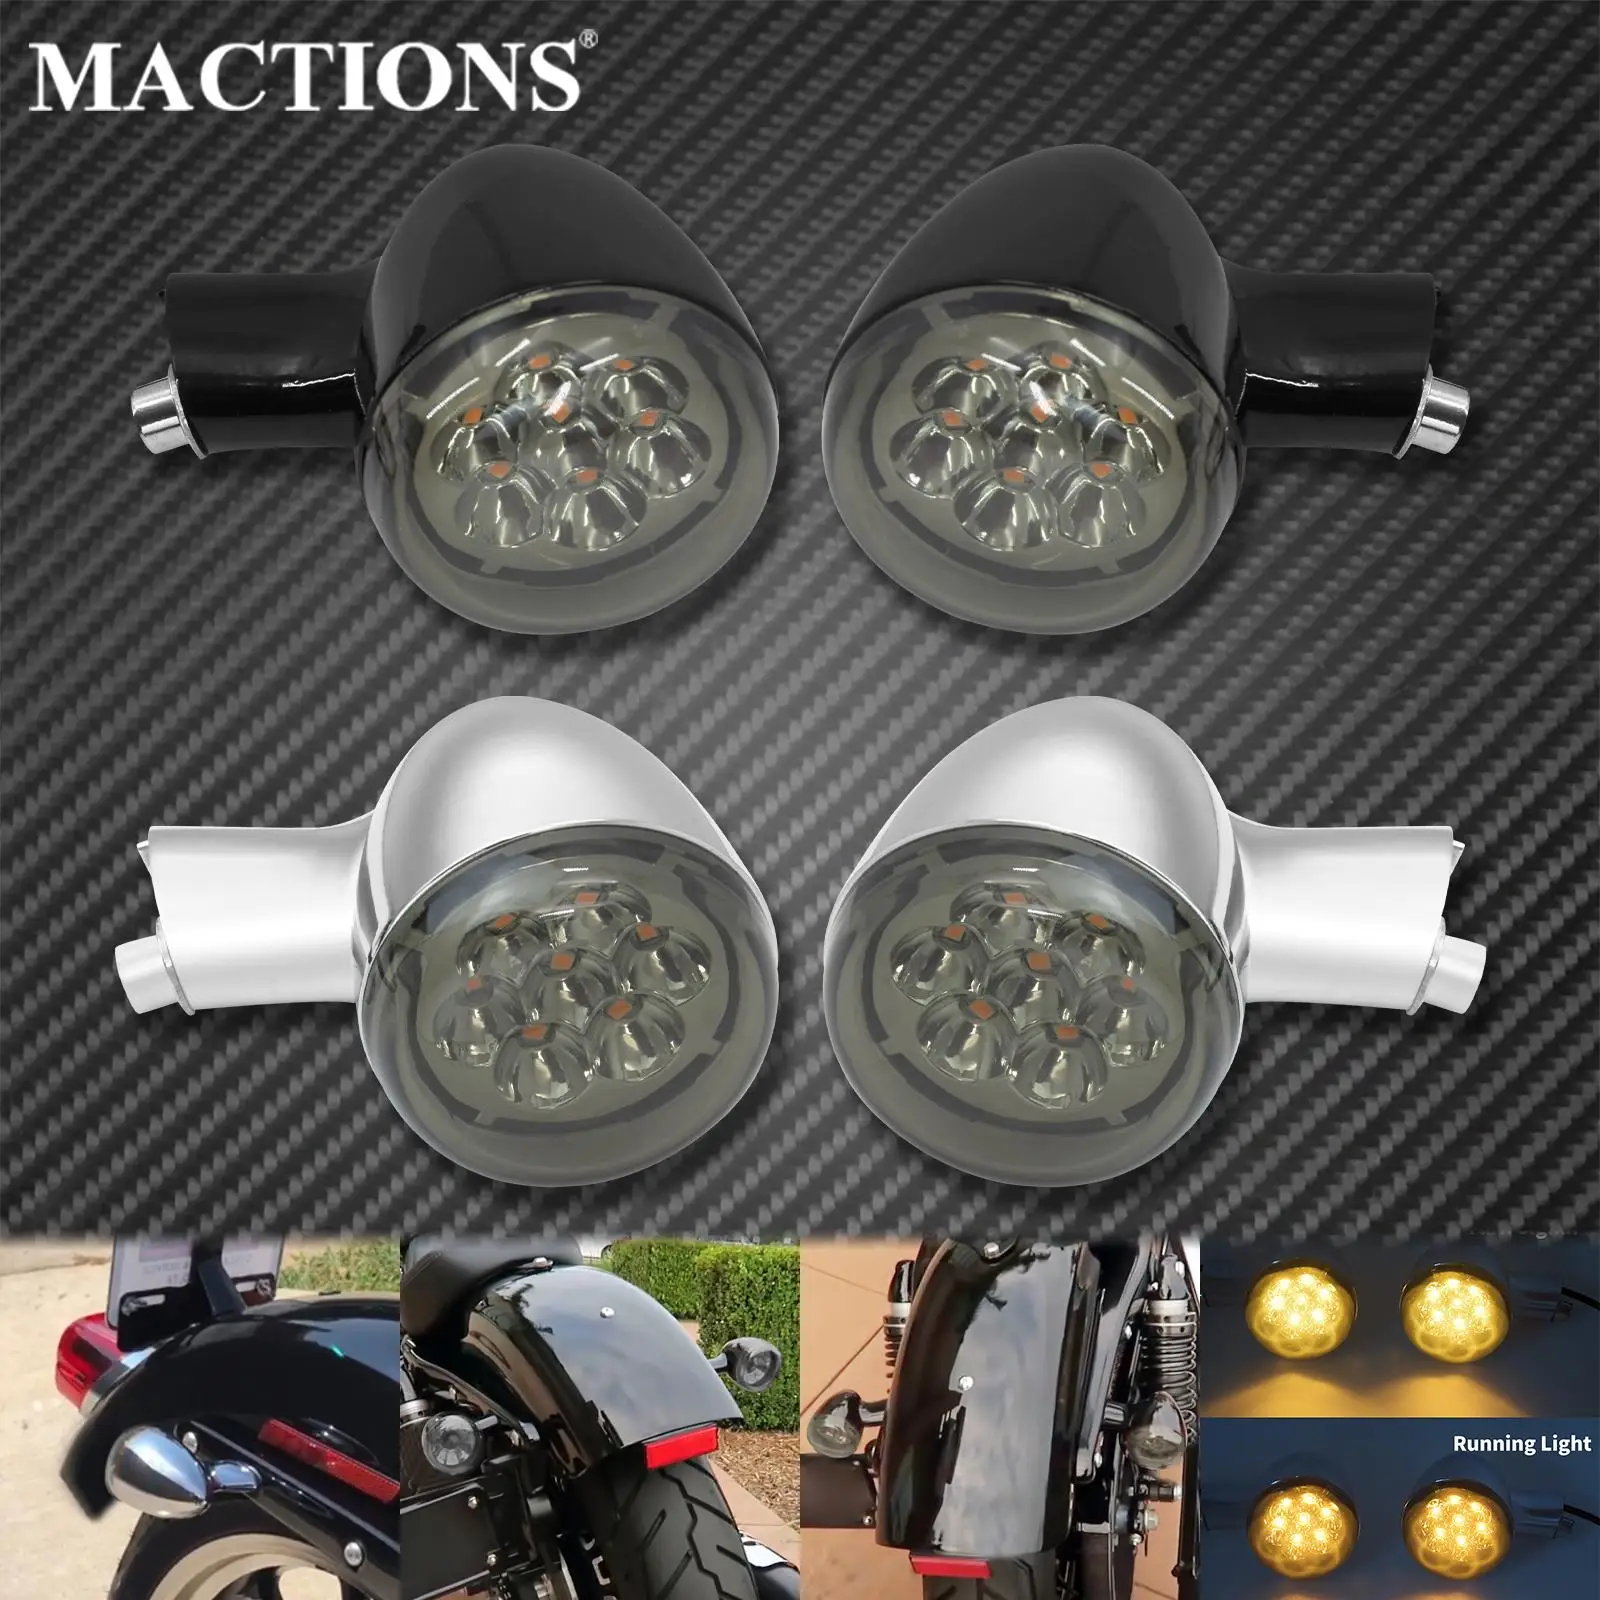 

Motorcycle Amber Rear Turn Signals LED Lights Bracket W/ 6PCS Lens Cover For Harley Sportster XL 883 1200 Nightster 92-21